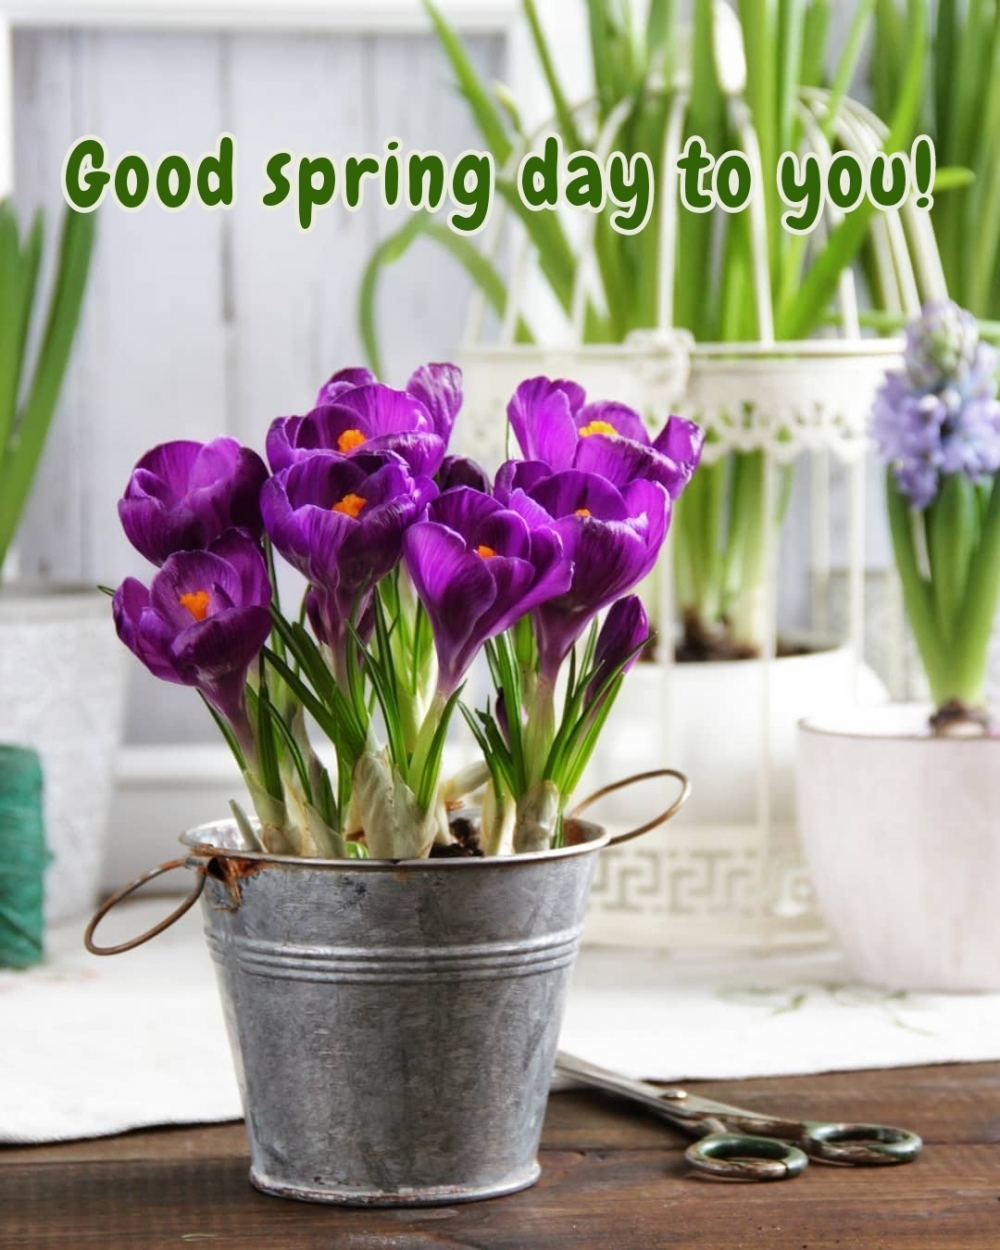 Good spring day to you!